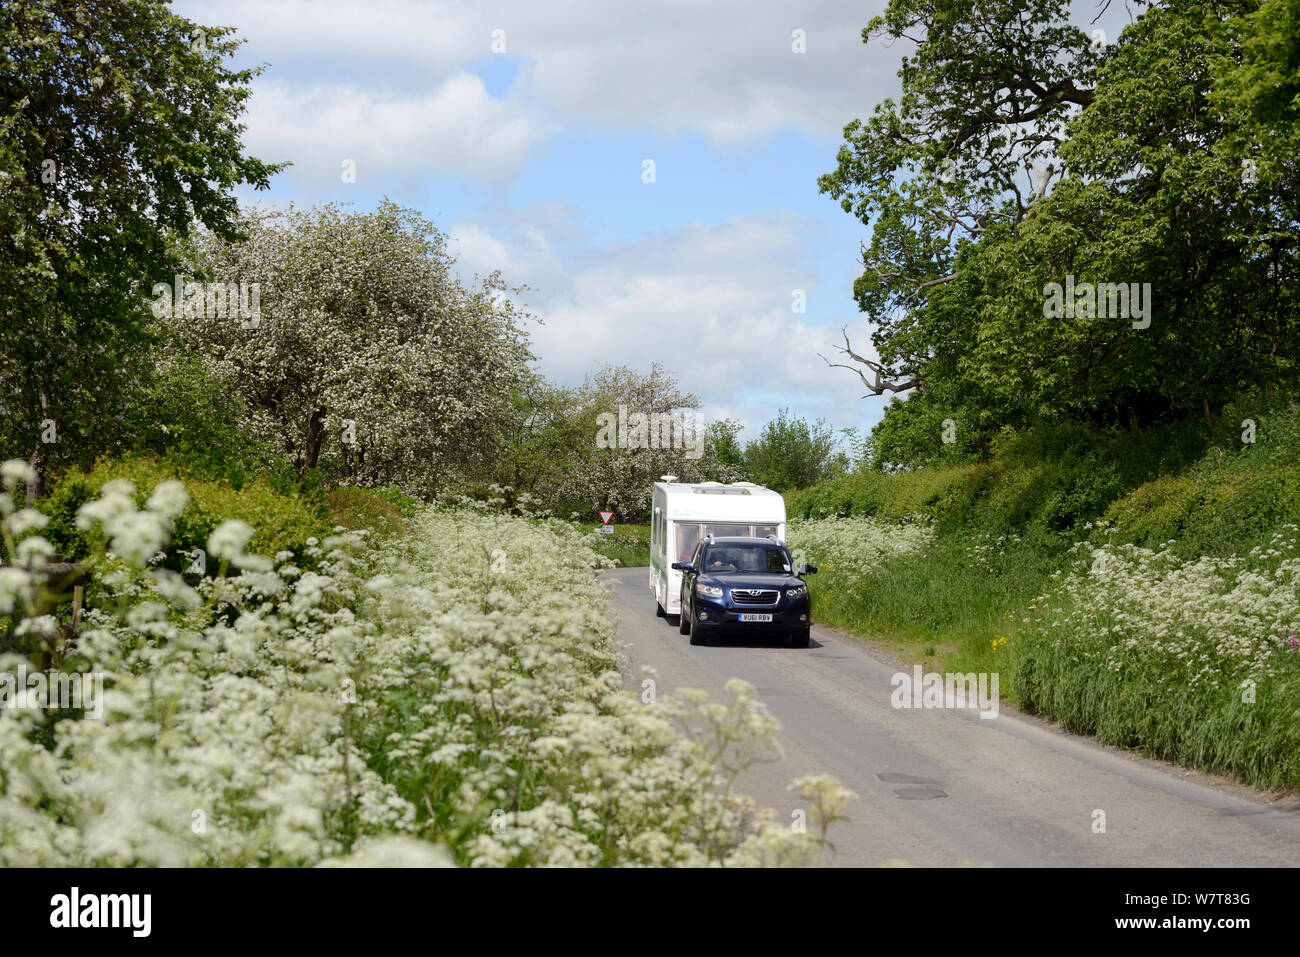 Car towing caravan down road with verge of flowering Cow Parsley (Anthriscus sylvestris) and flowering cider apple trees in background, Herefordshire, UK, June. Stock Photo